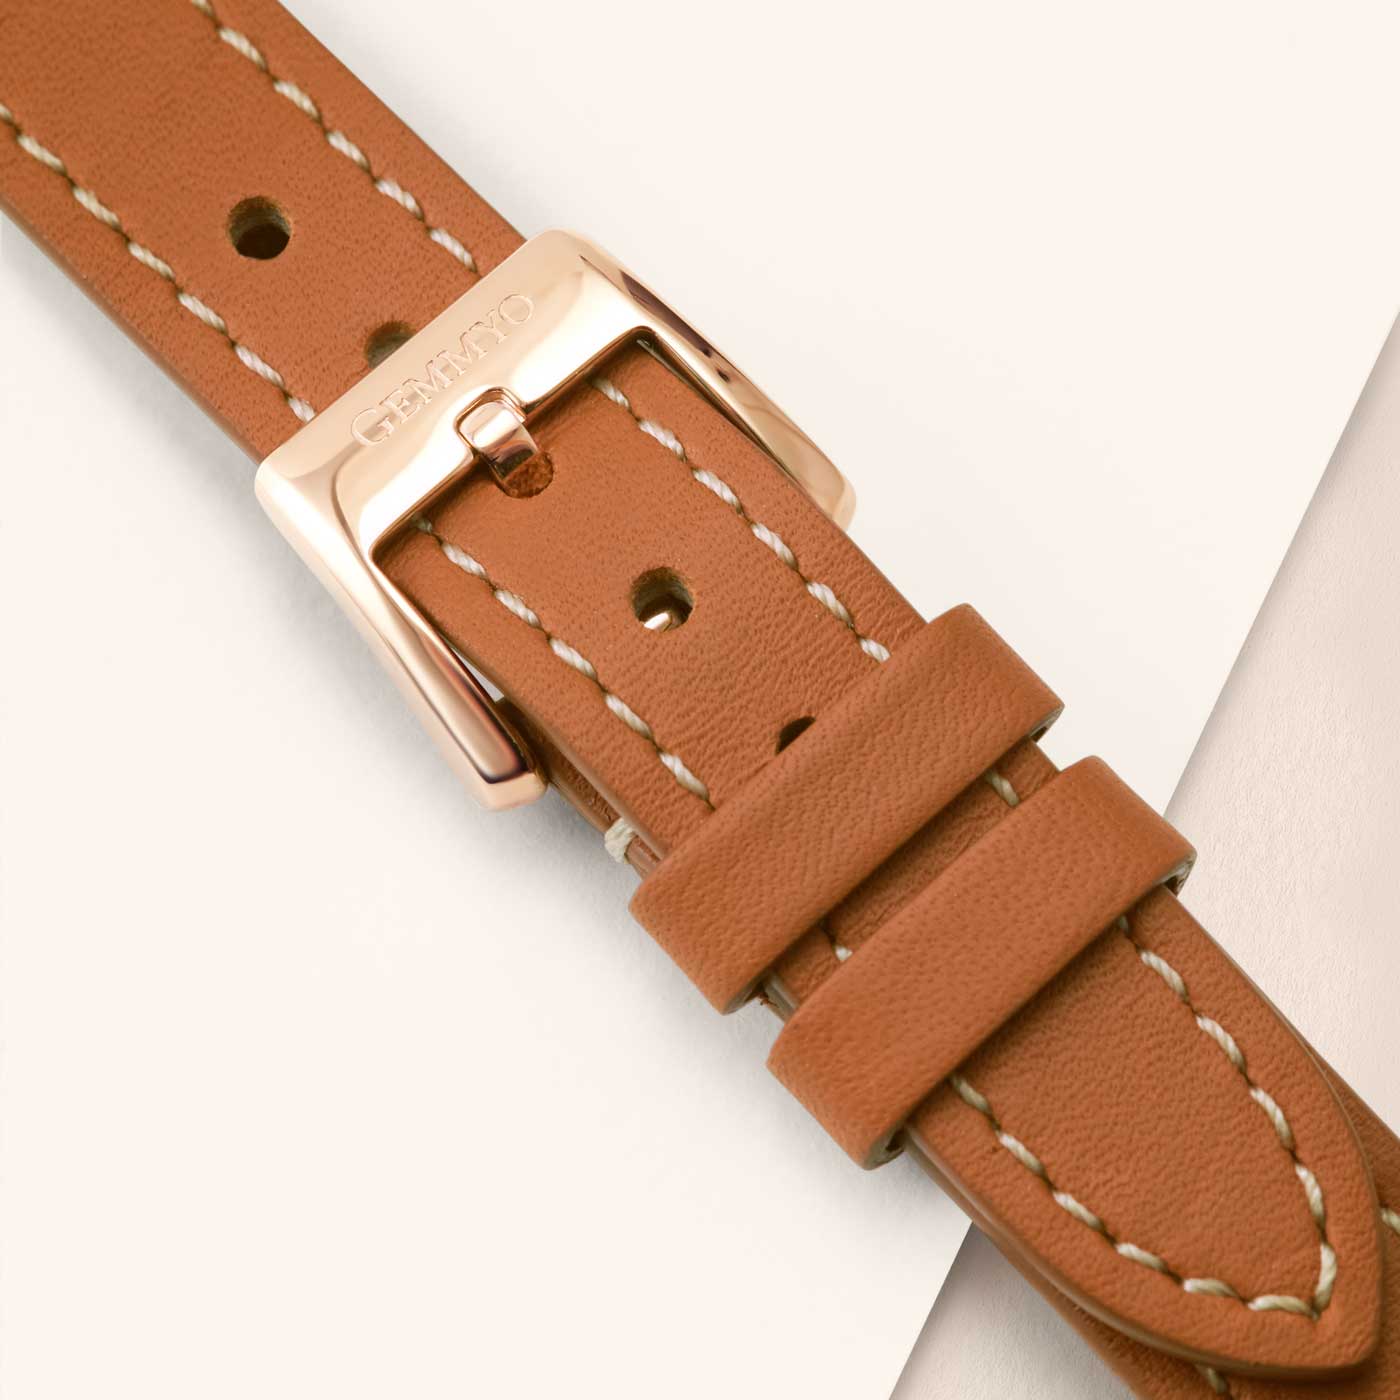 Prima simple Watch strap zoom